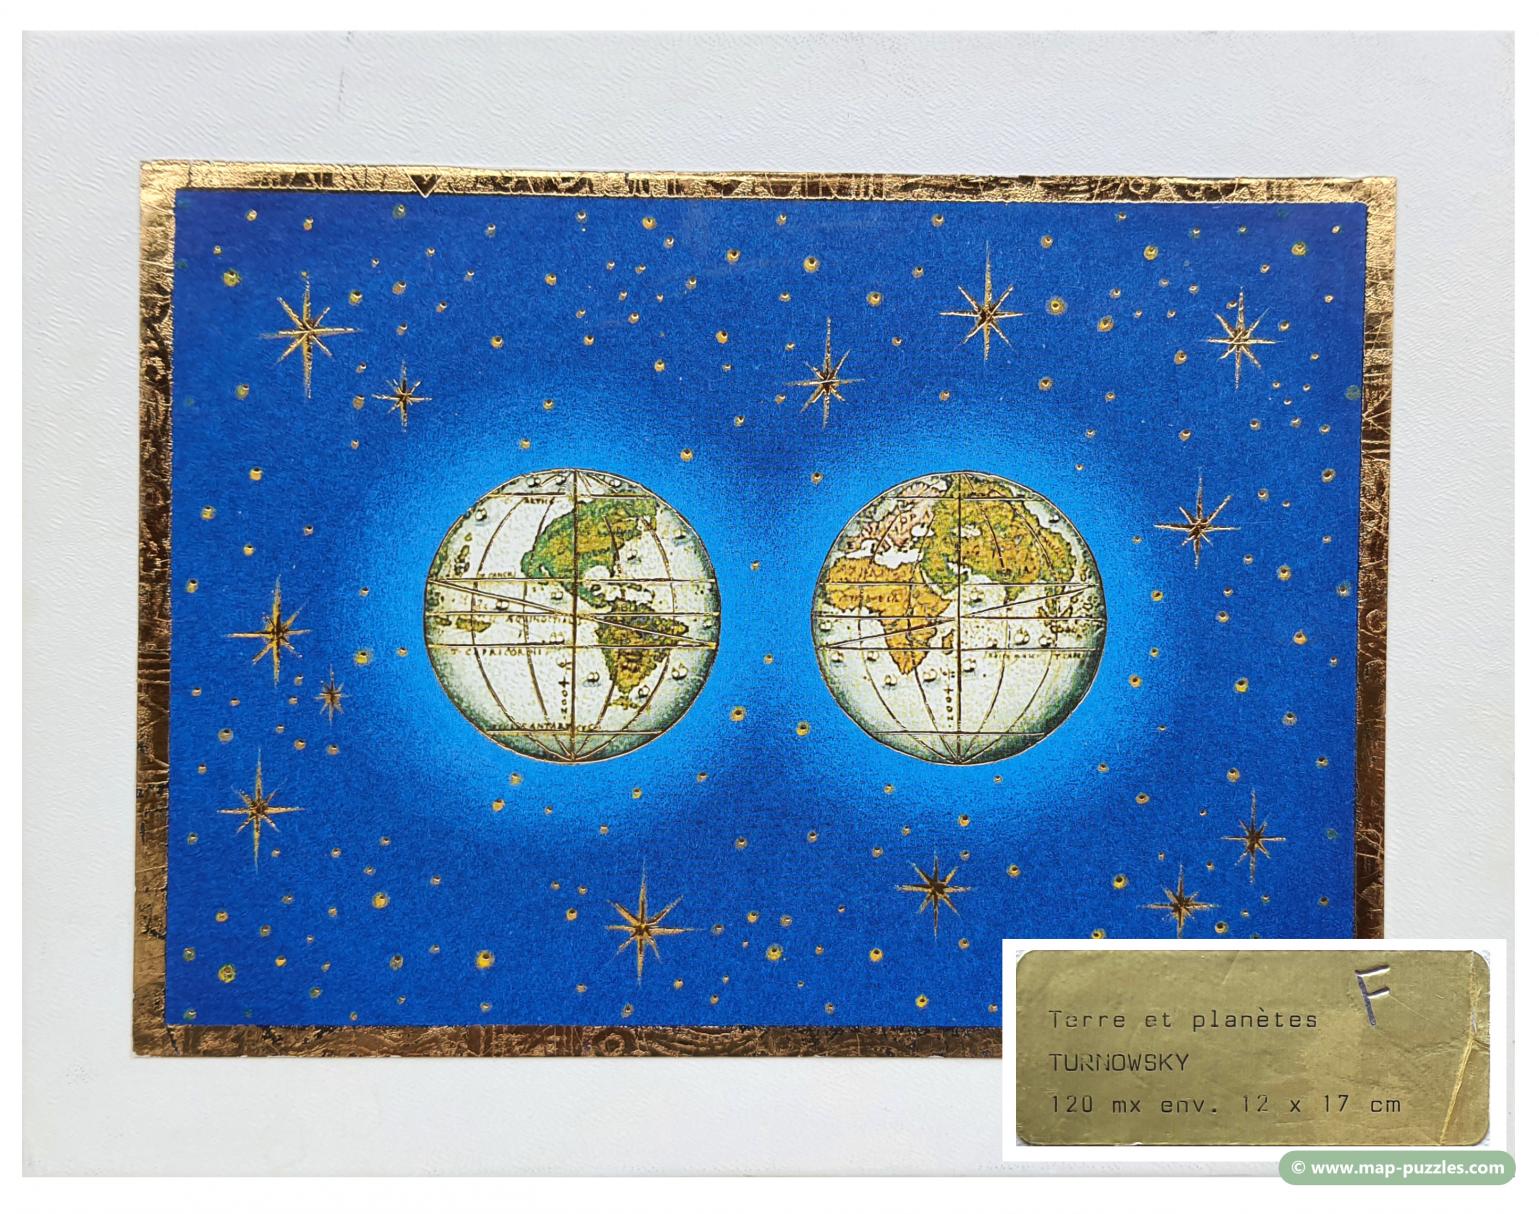 C mh-0597 Michele Wilson 120 World Map Puzzle cpl